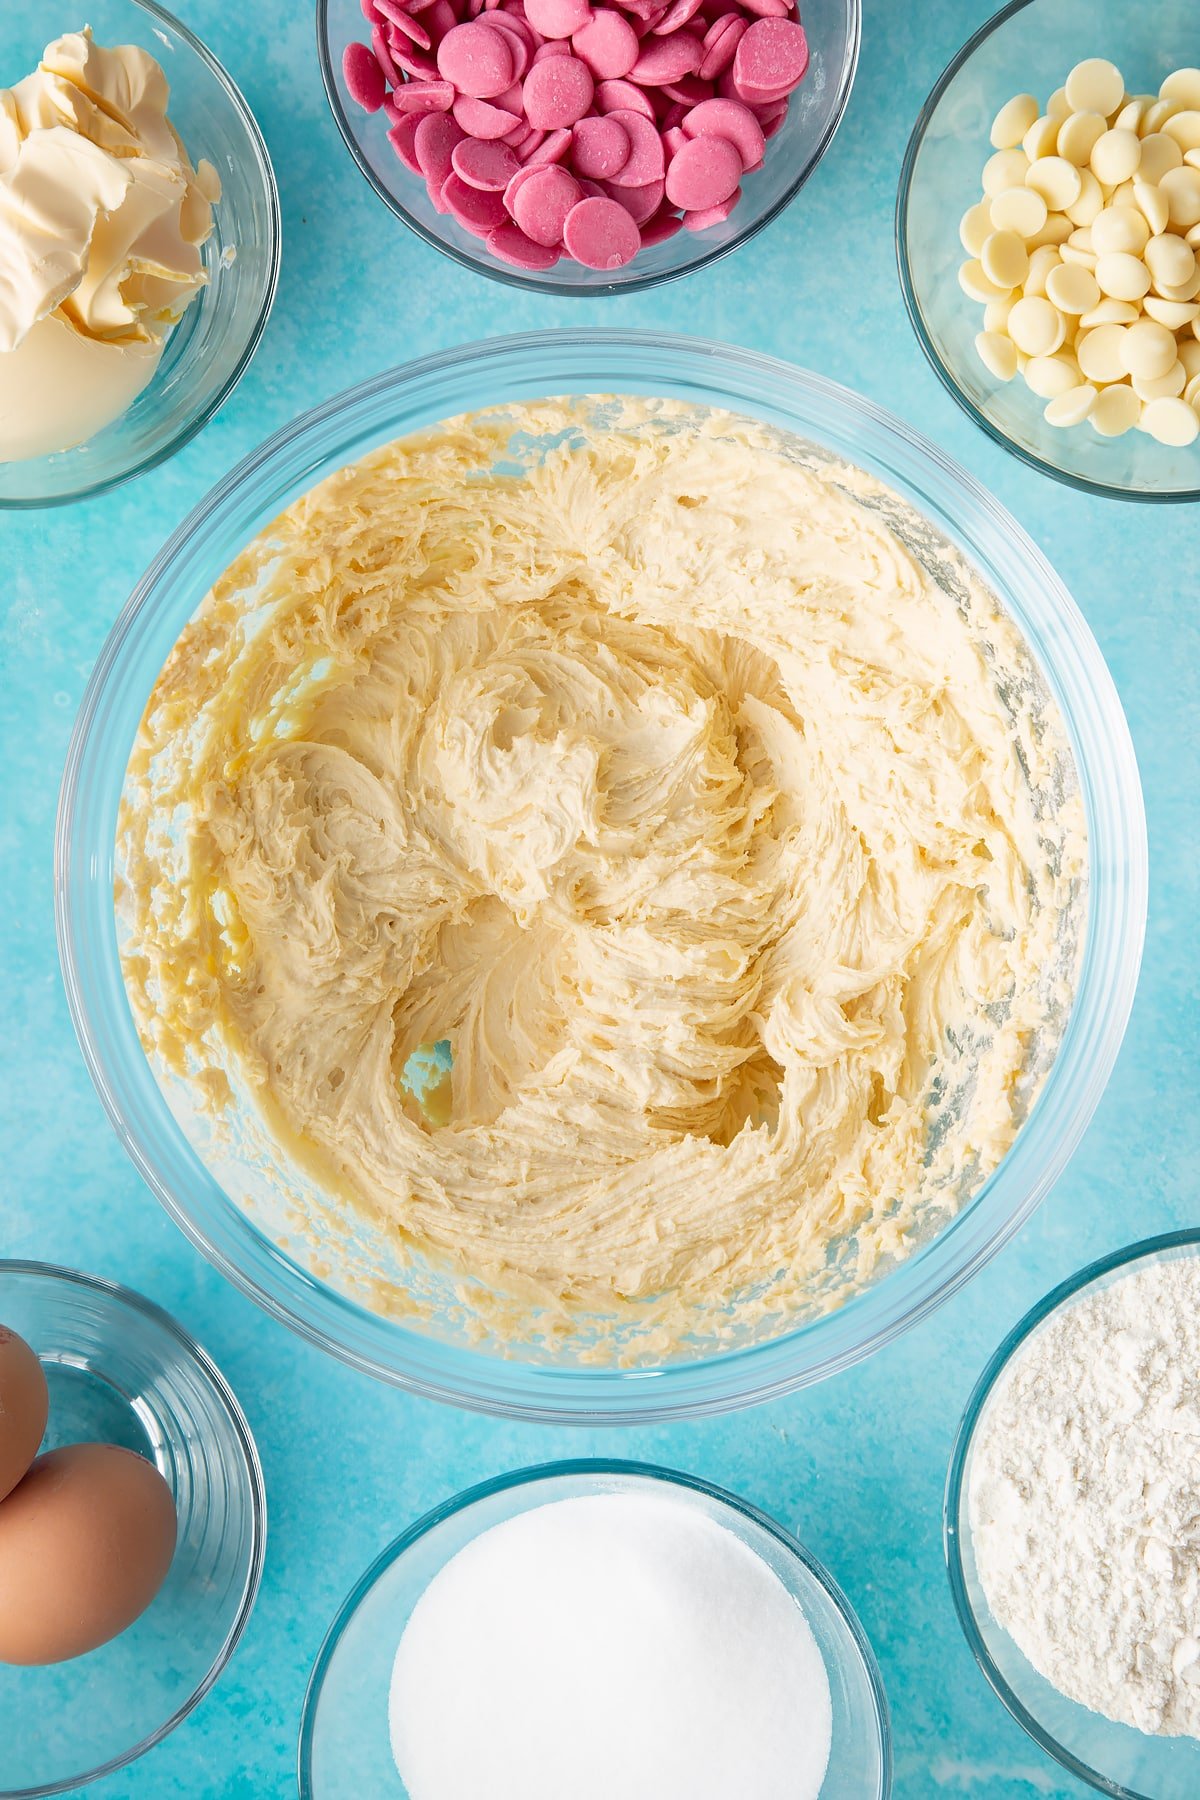 whisked margarine, sugar, eggs and flour in a large clear bowl surrounded by ingredients.